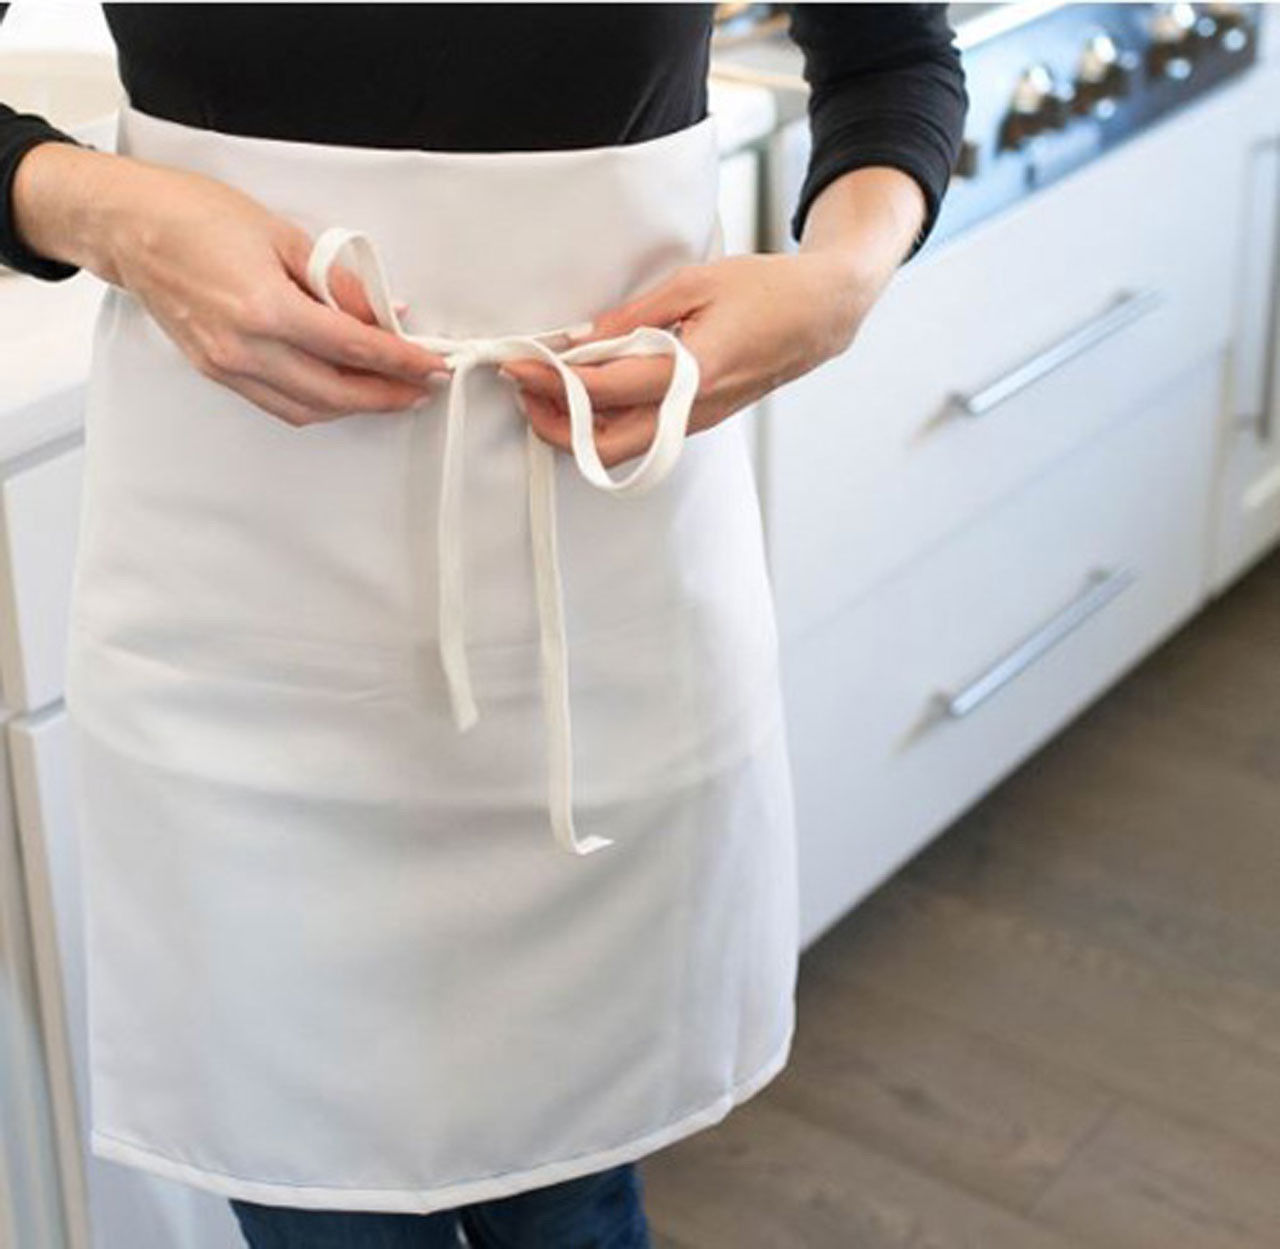 Where is the 4 way apron shipped from before purchase?